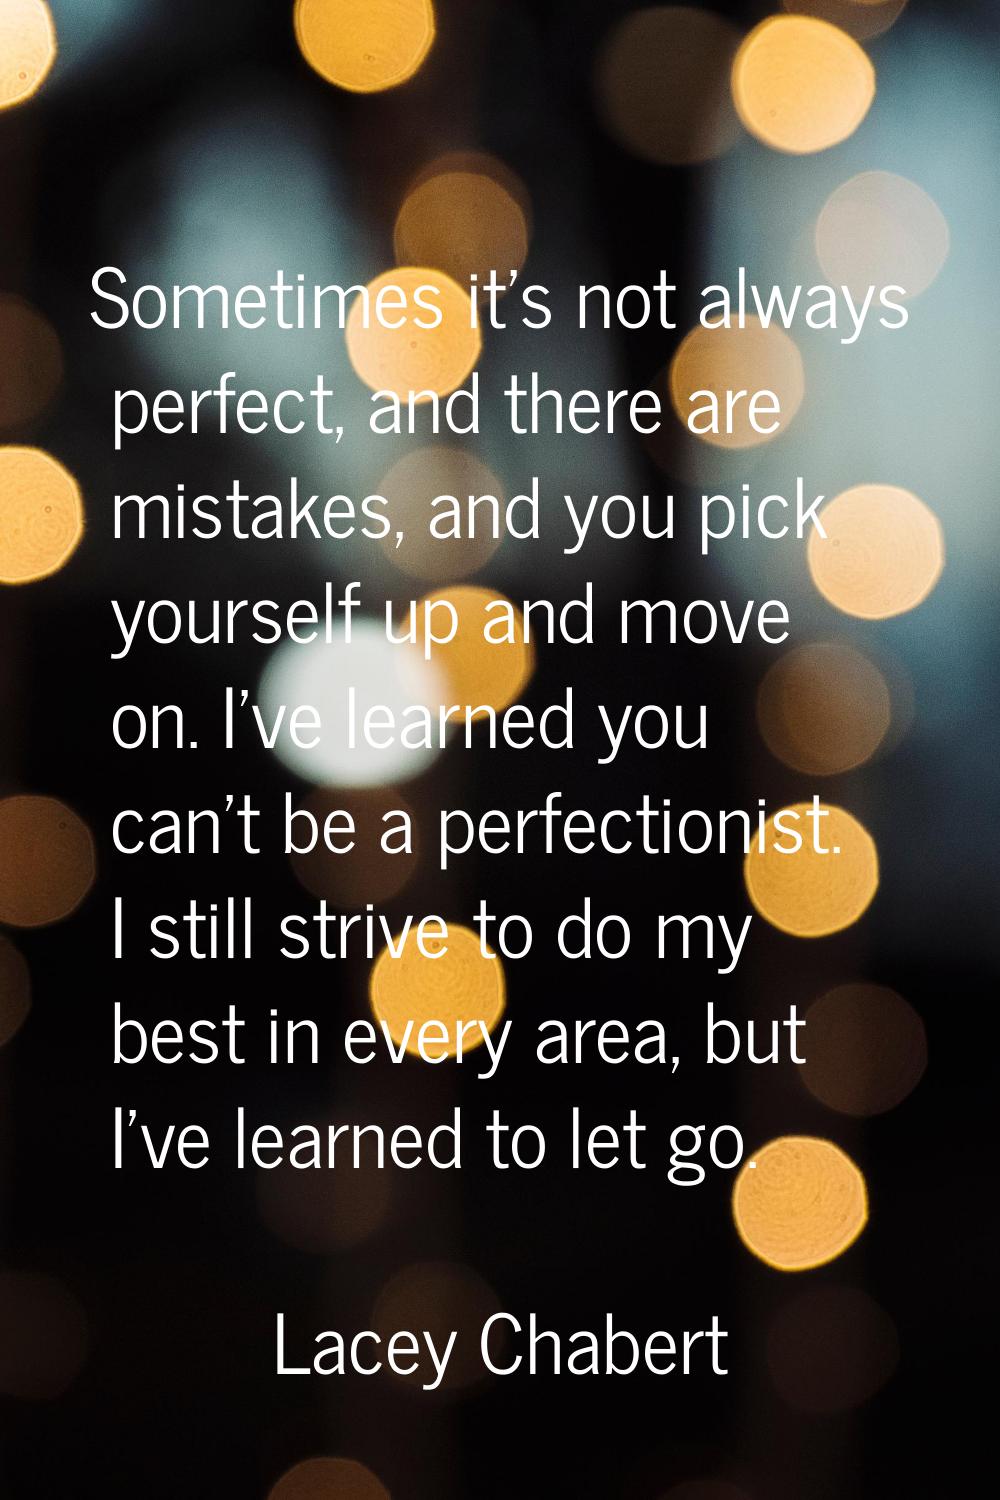 Sometimes it's not always perfect, and there are mistakes, and you pick yourself up and move on. I'